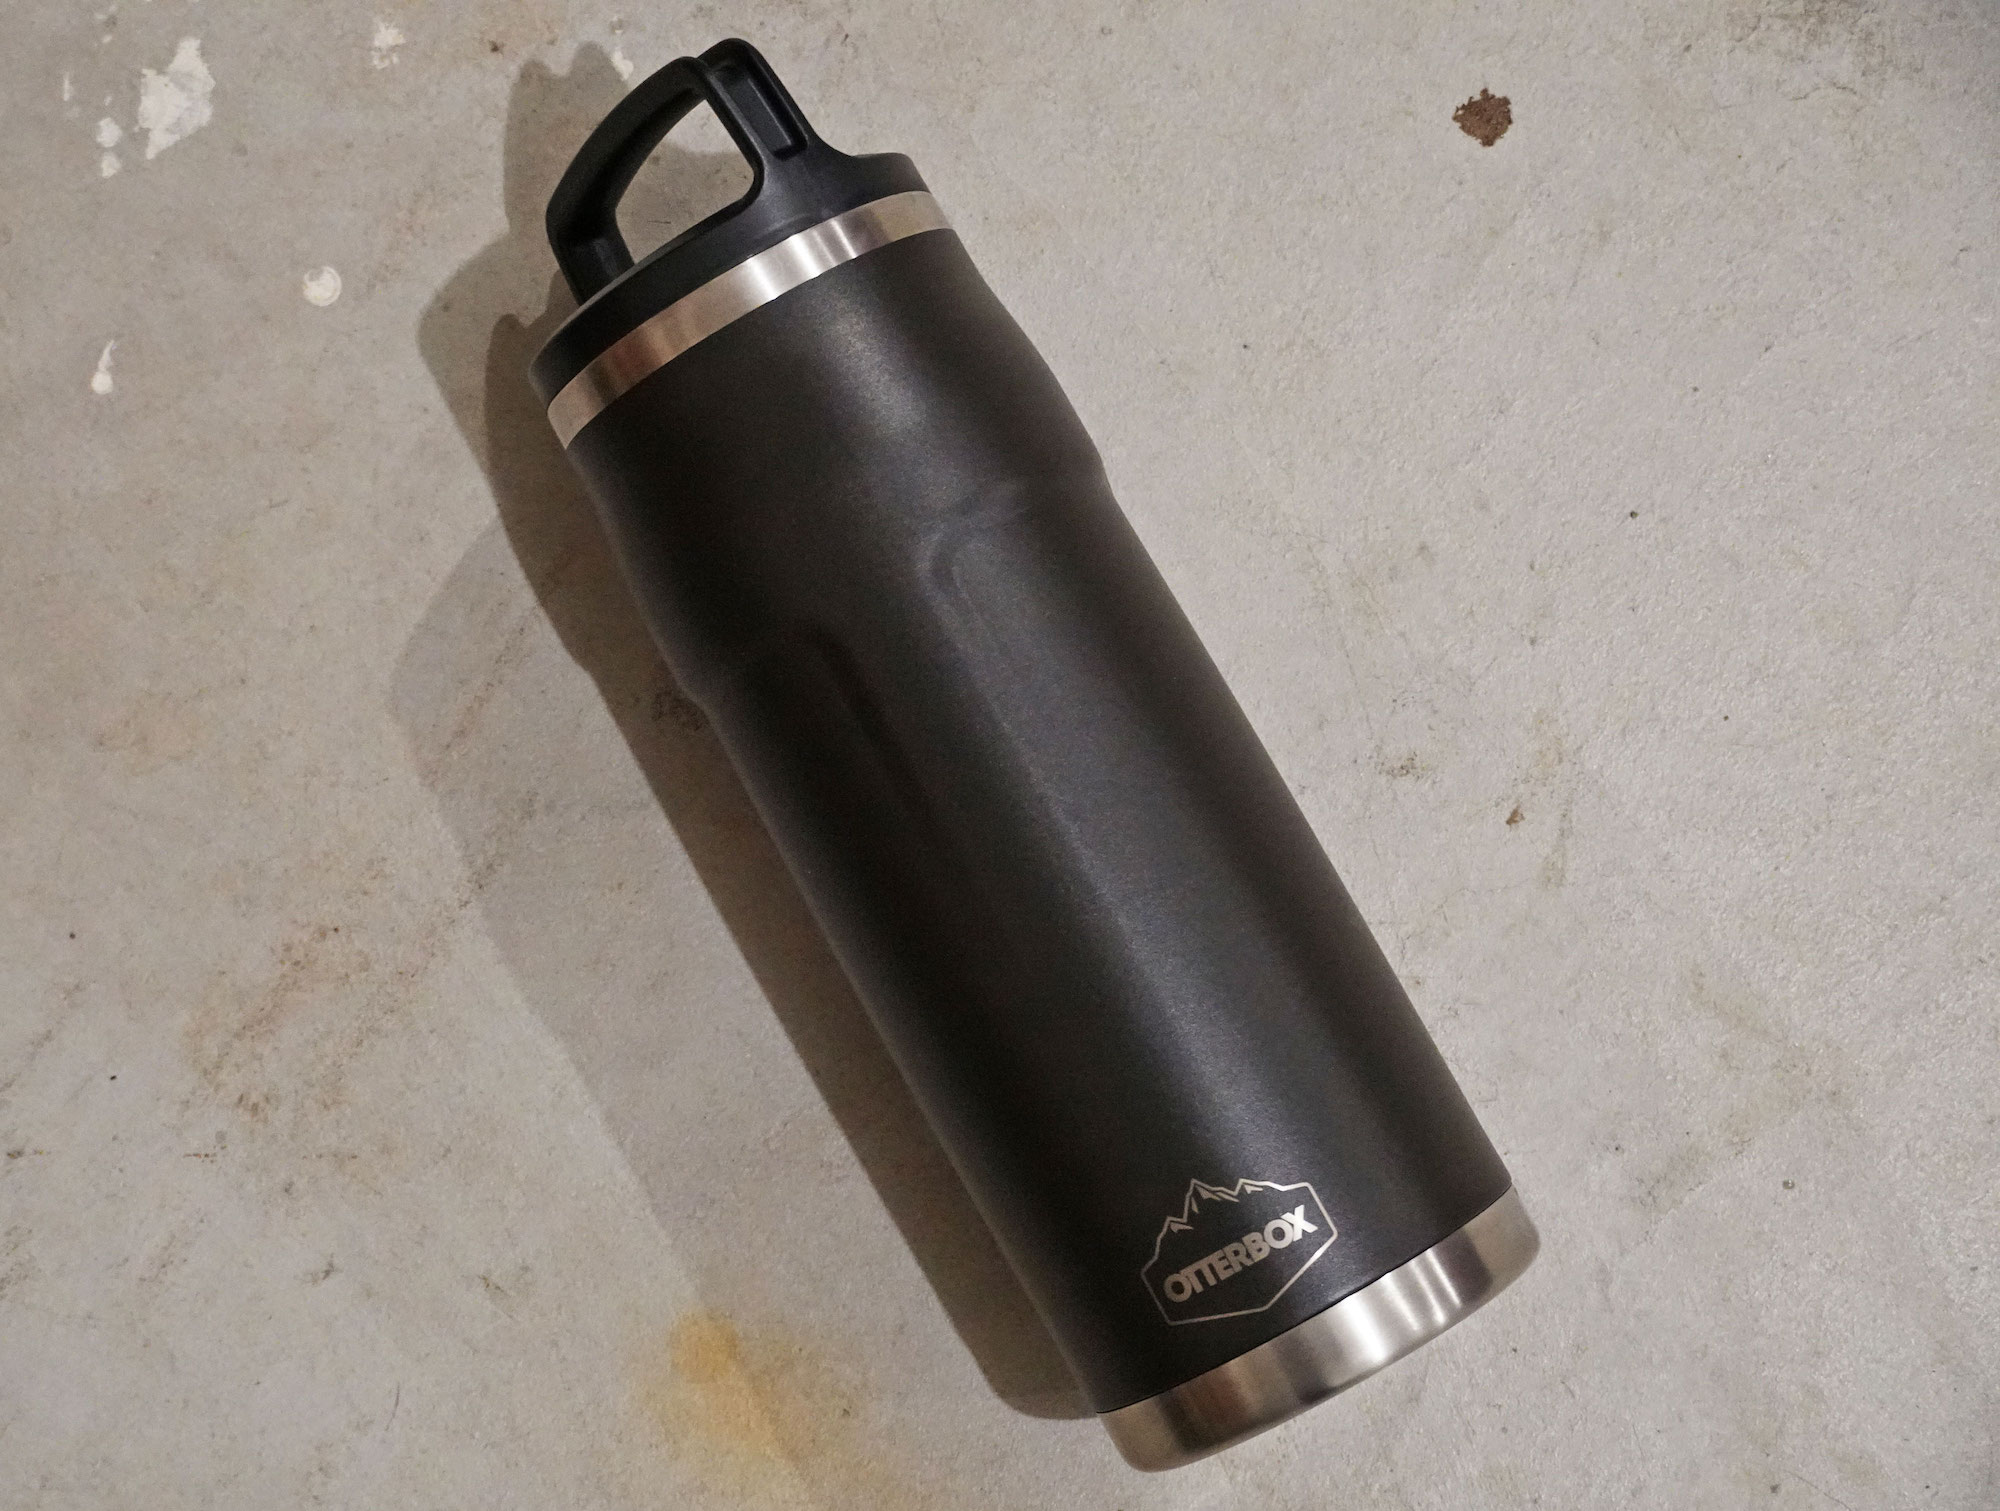 Best vacuum flask: we test some of the market leaders - Yachting Monthly